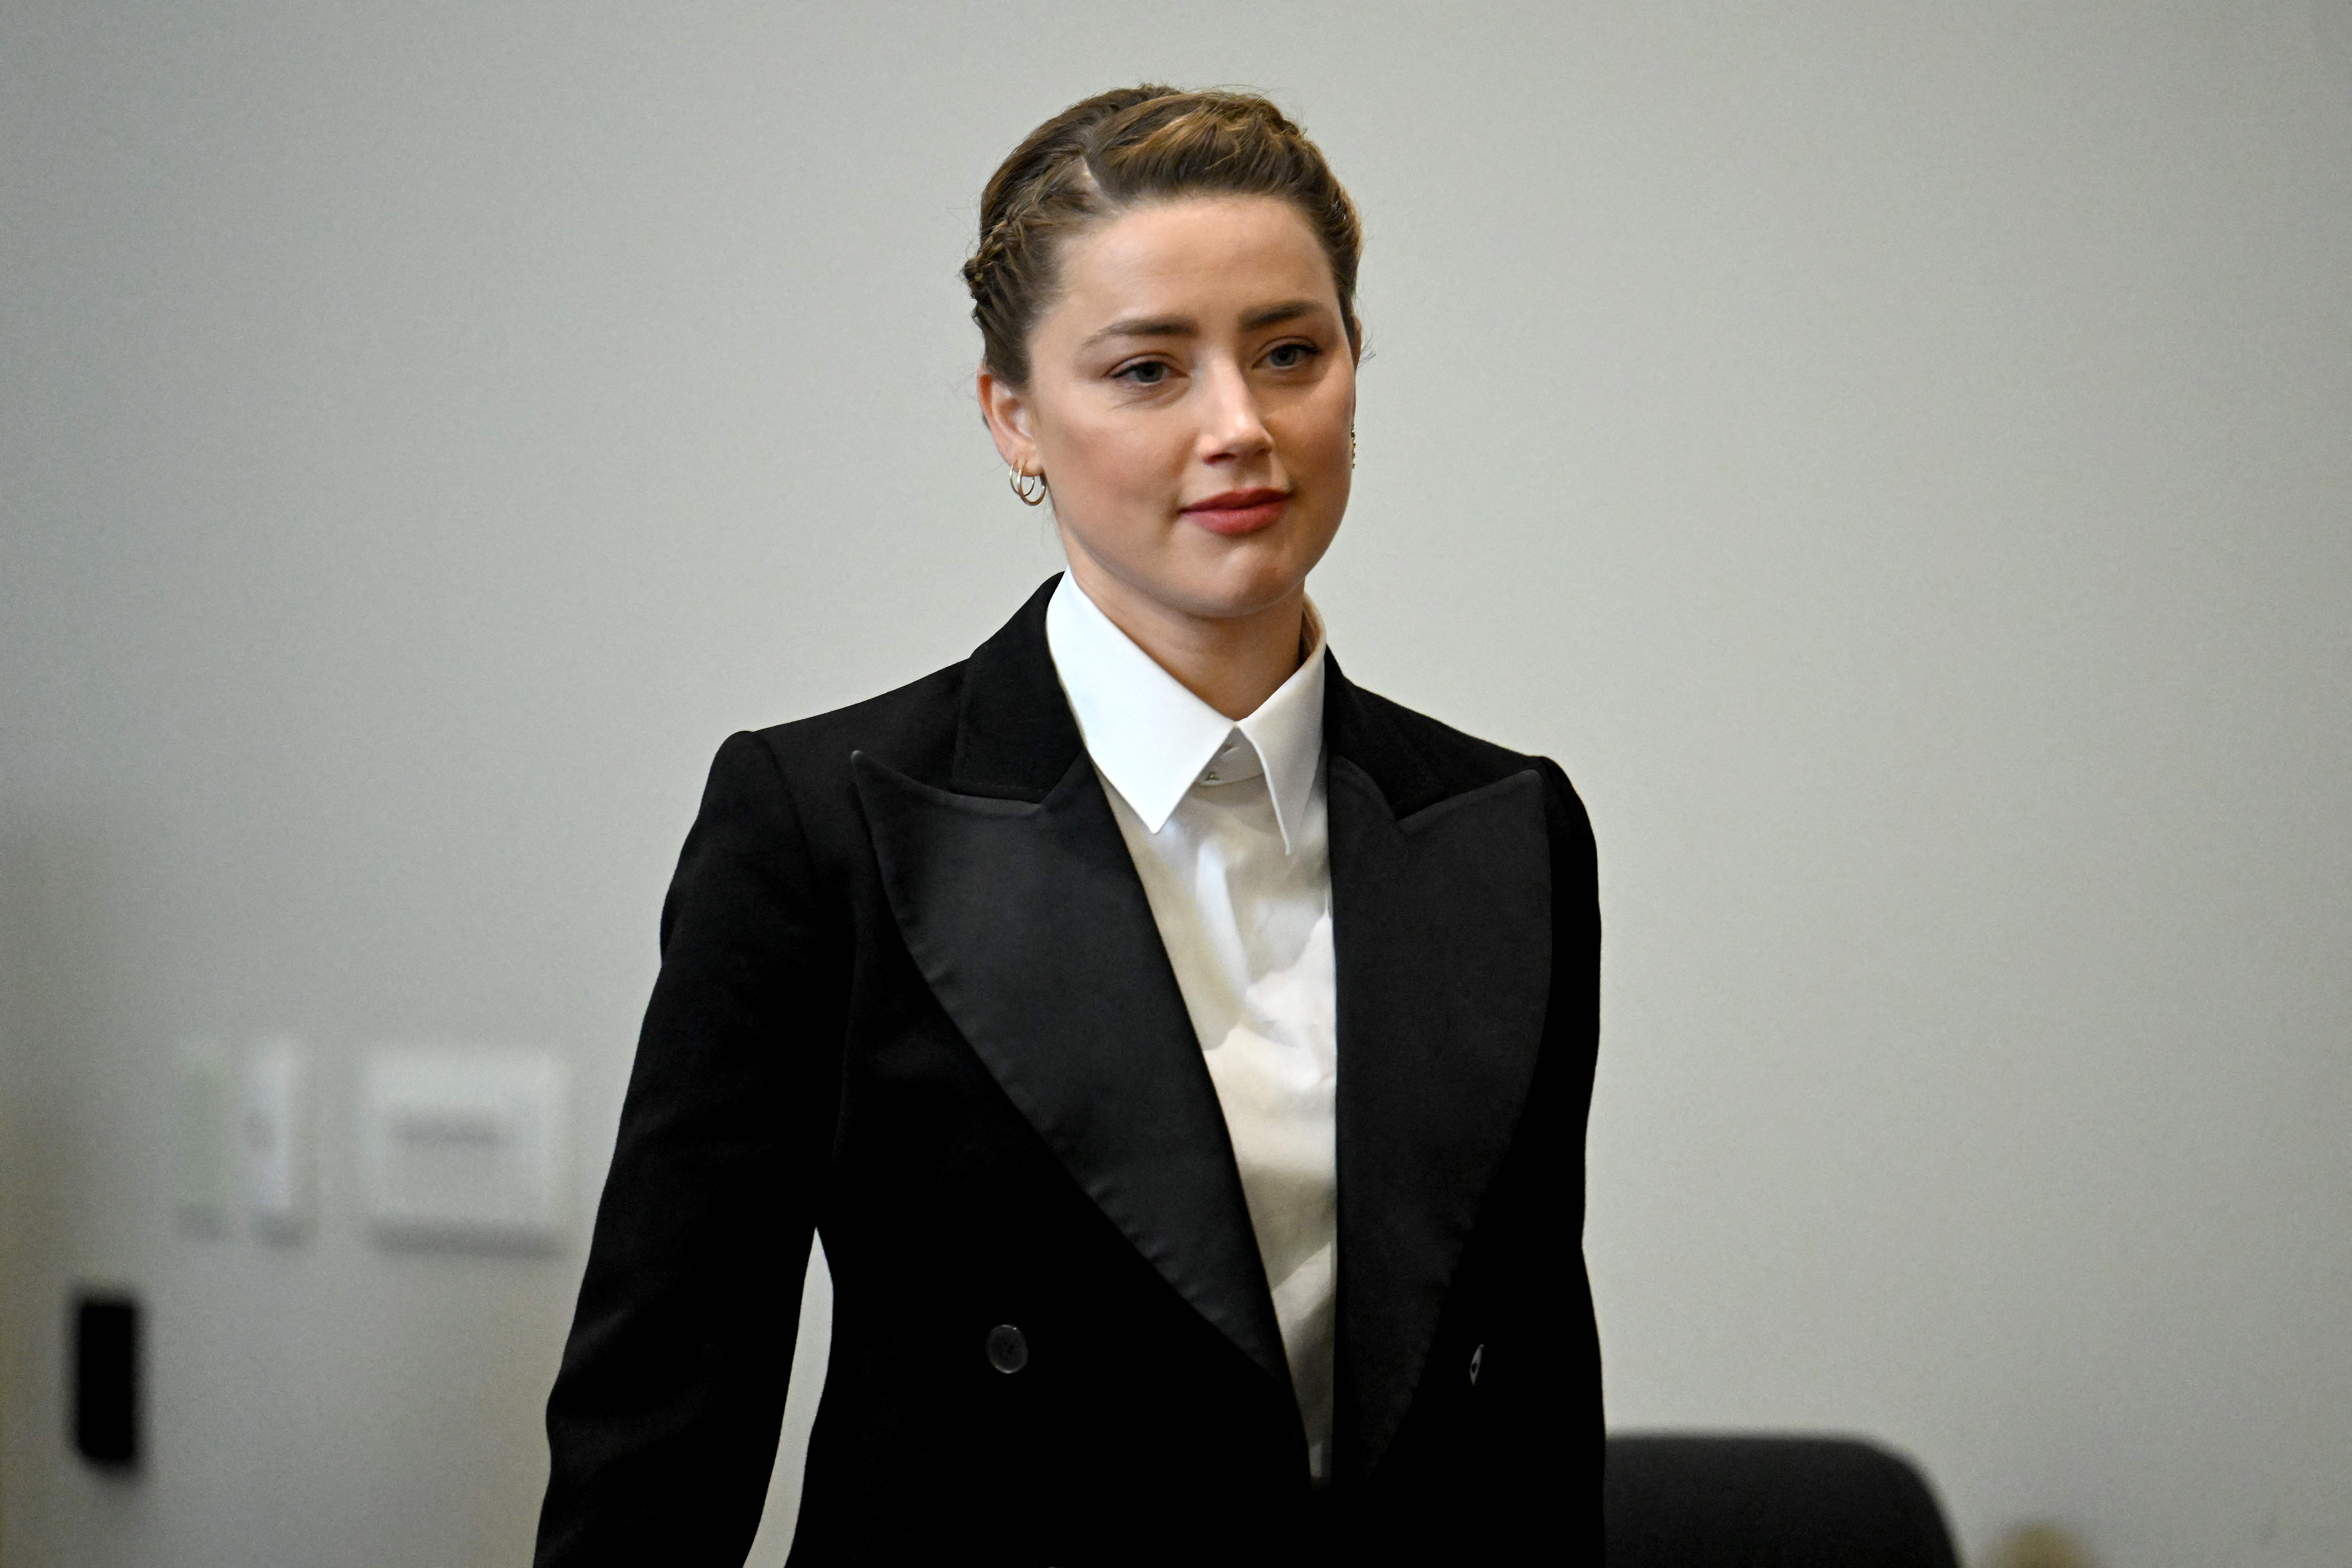 Amber Heard in the courtroom at the Fairfax County Circuit Court in Fairfax, Virginia, on May 3, 2022 | Source: Getty Images